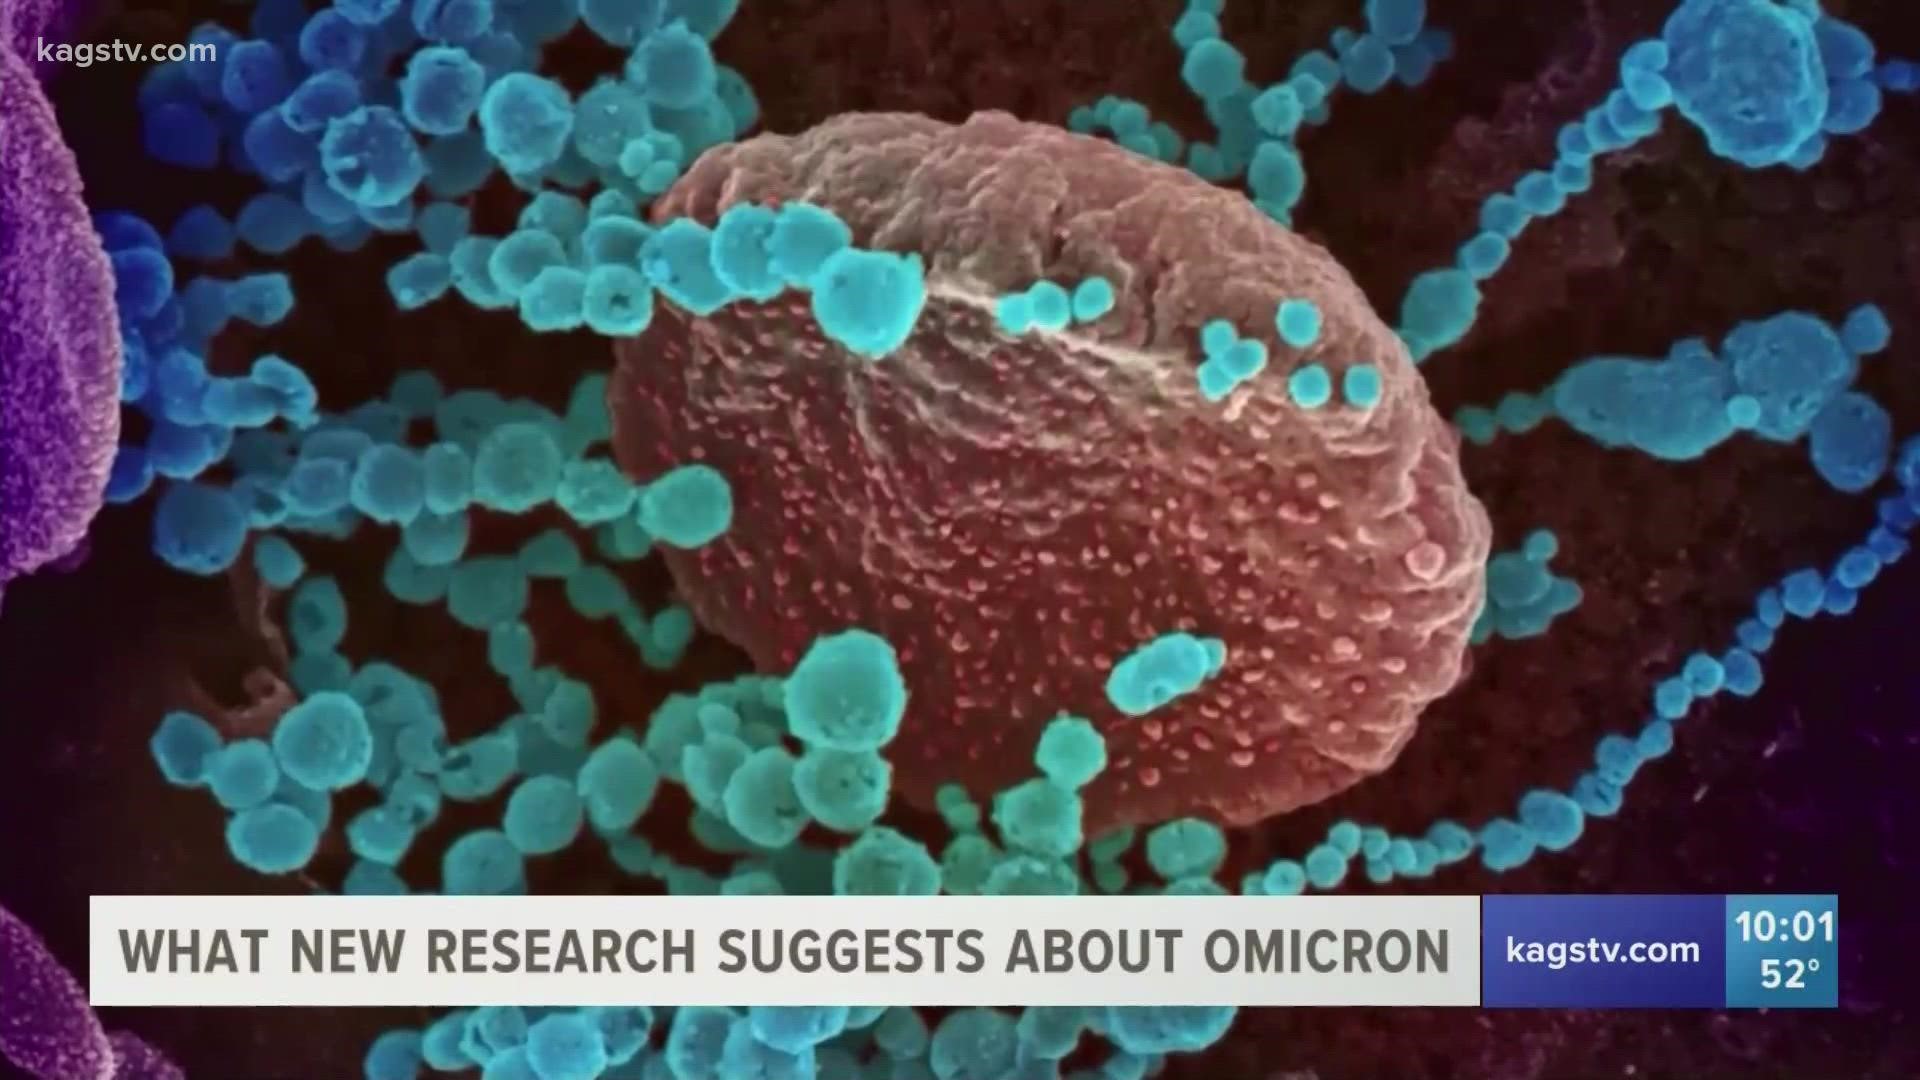 According to research out of South Africa, the Omicron COVID variant is at least three times more likely to cause reinfection than the Delta variant.